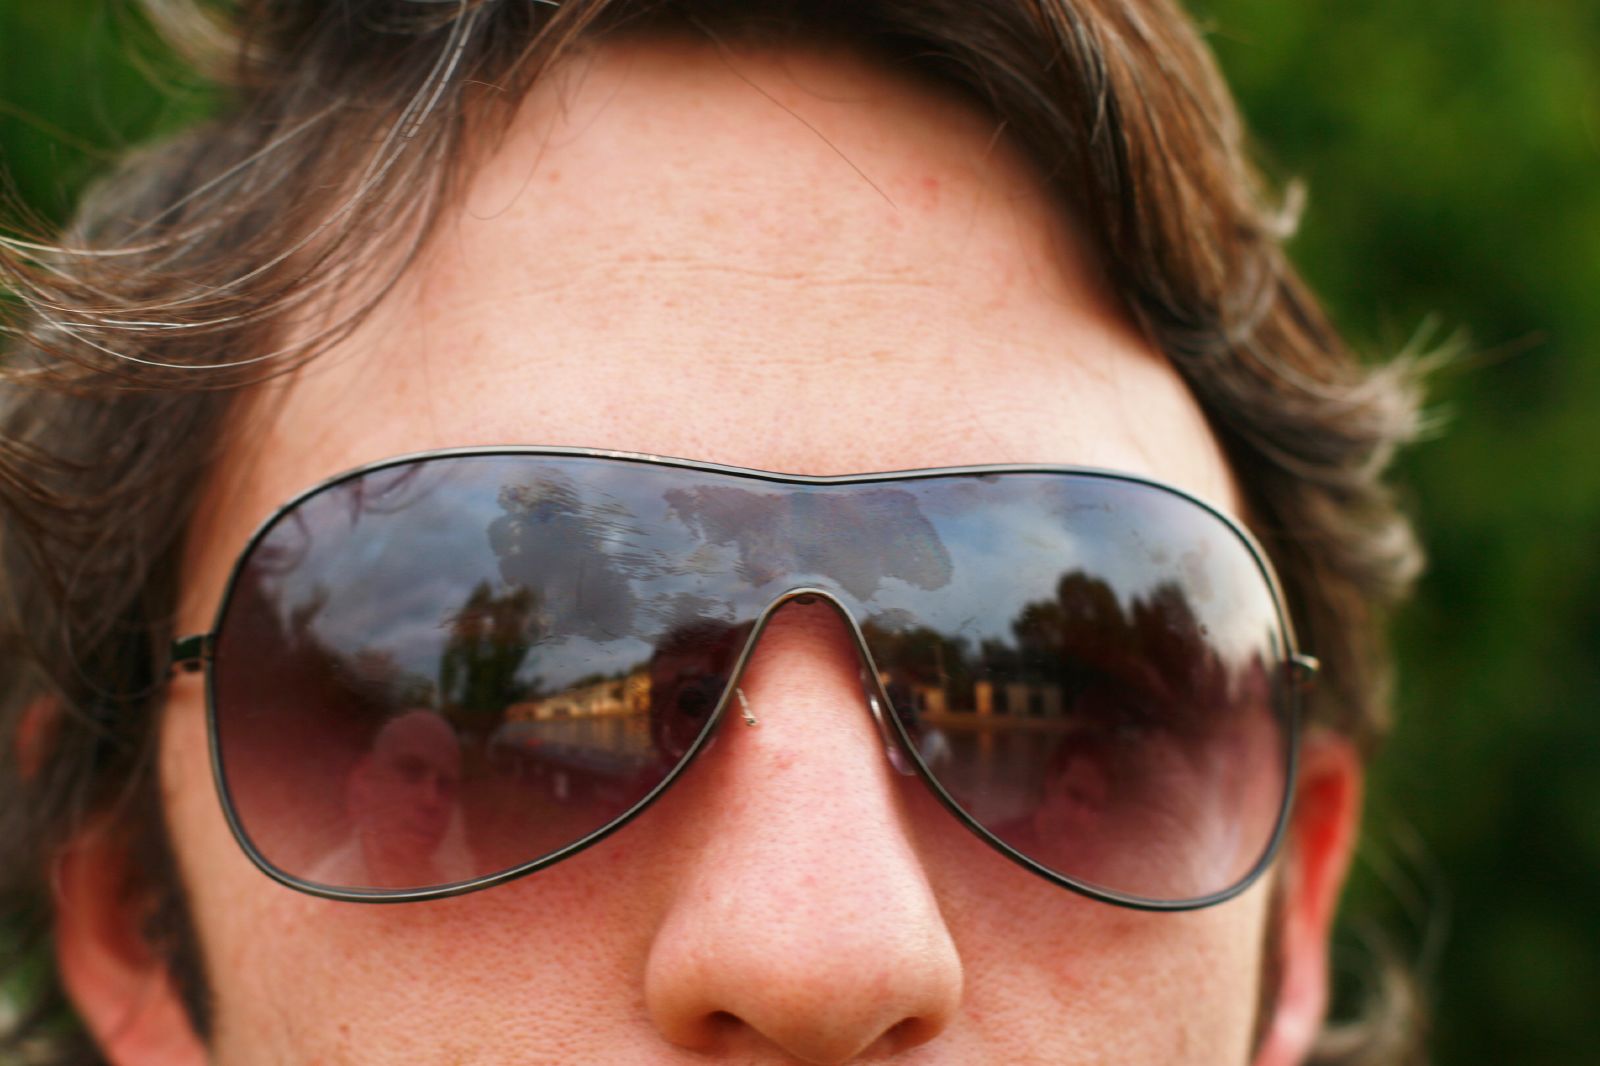 a man with a pair of sunglasses reflecting his image